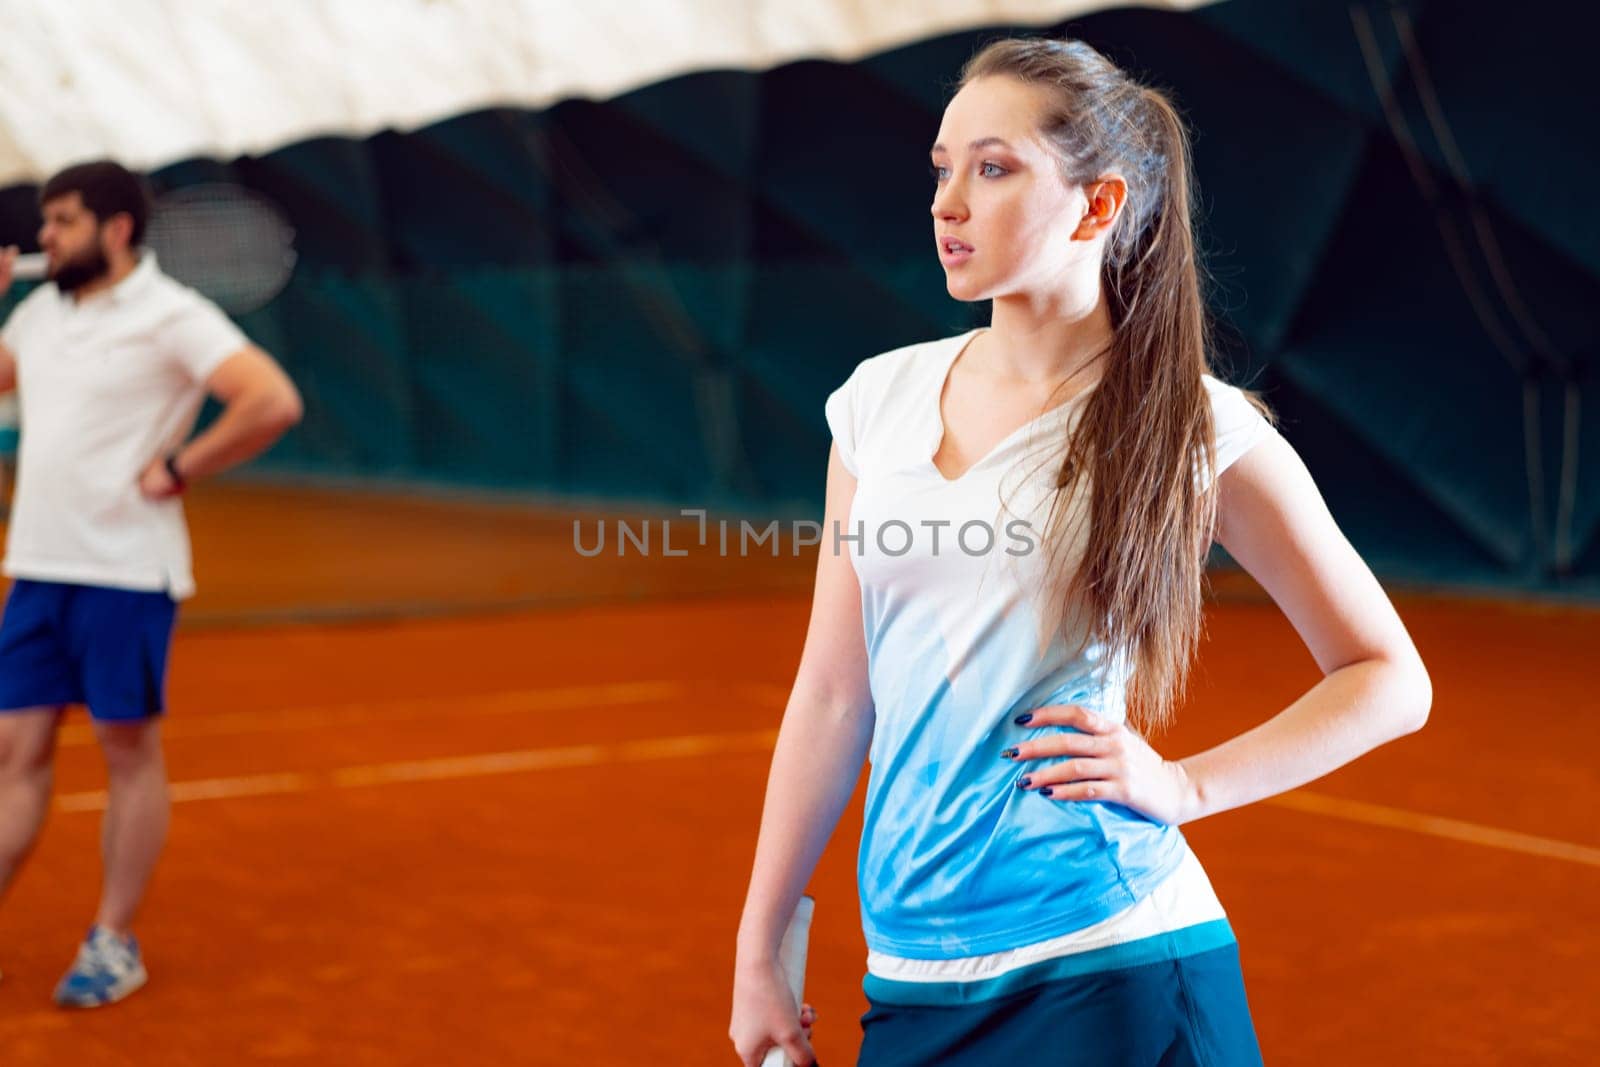 Young woman playing tennis at indoor tennis court